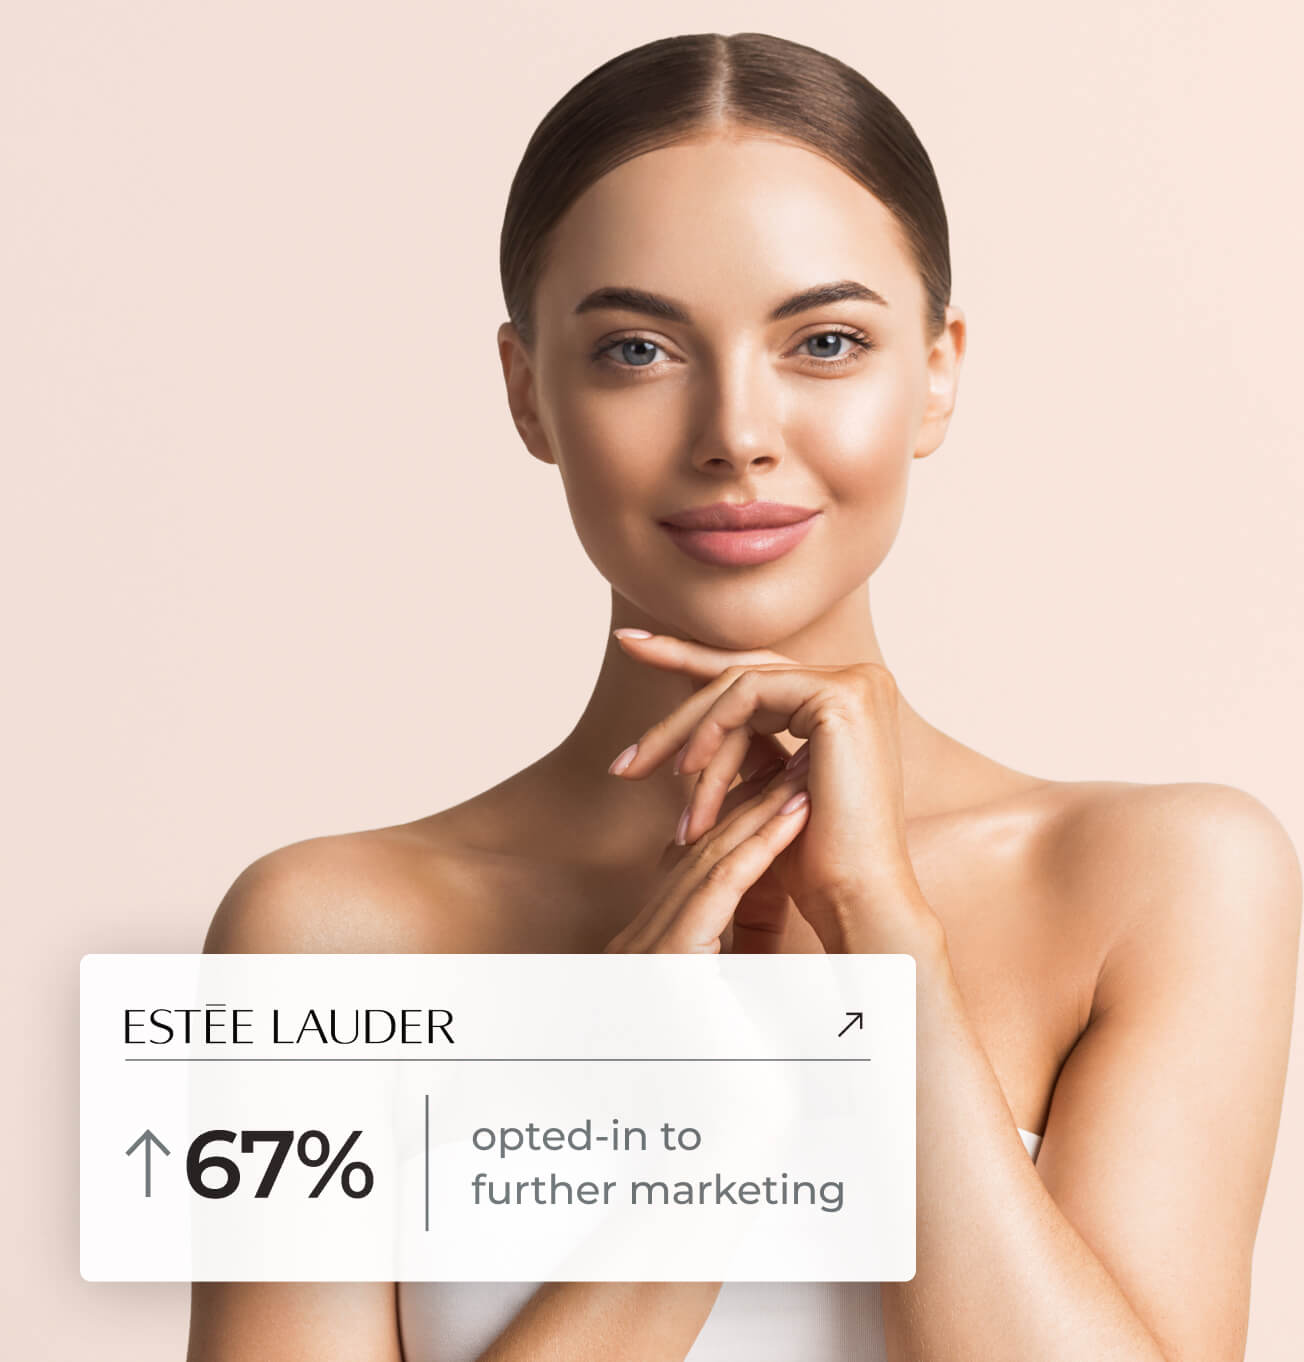 Estee Lauder - 67% opted-in to further marketing